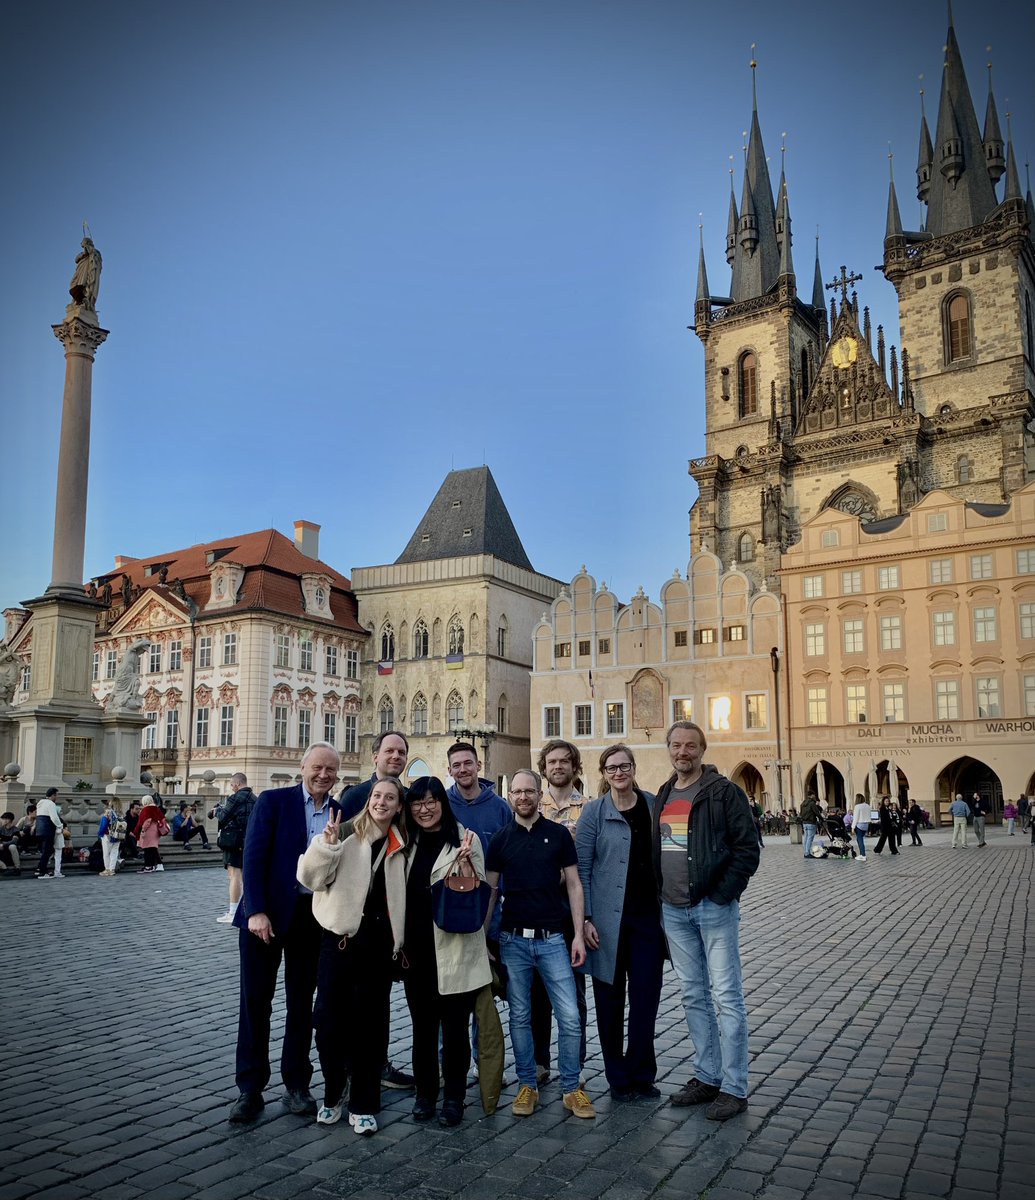 Great evening in Prague with our cool collaborators from Erlangen @WehnerLab @Franze_Lab and the Prague crew @KwokLab talking tissue mechanics over 🍻🍻